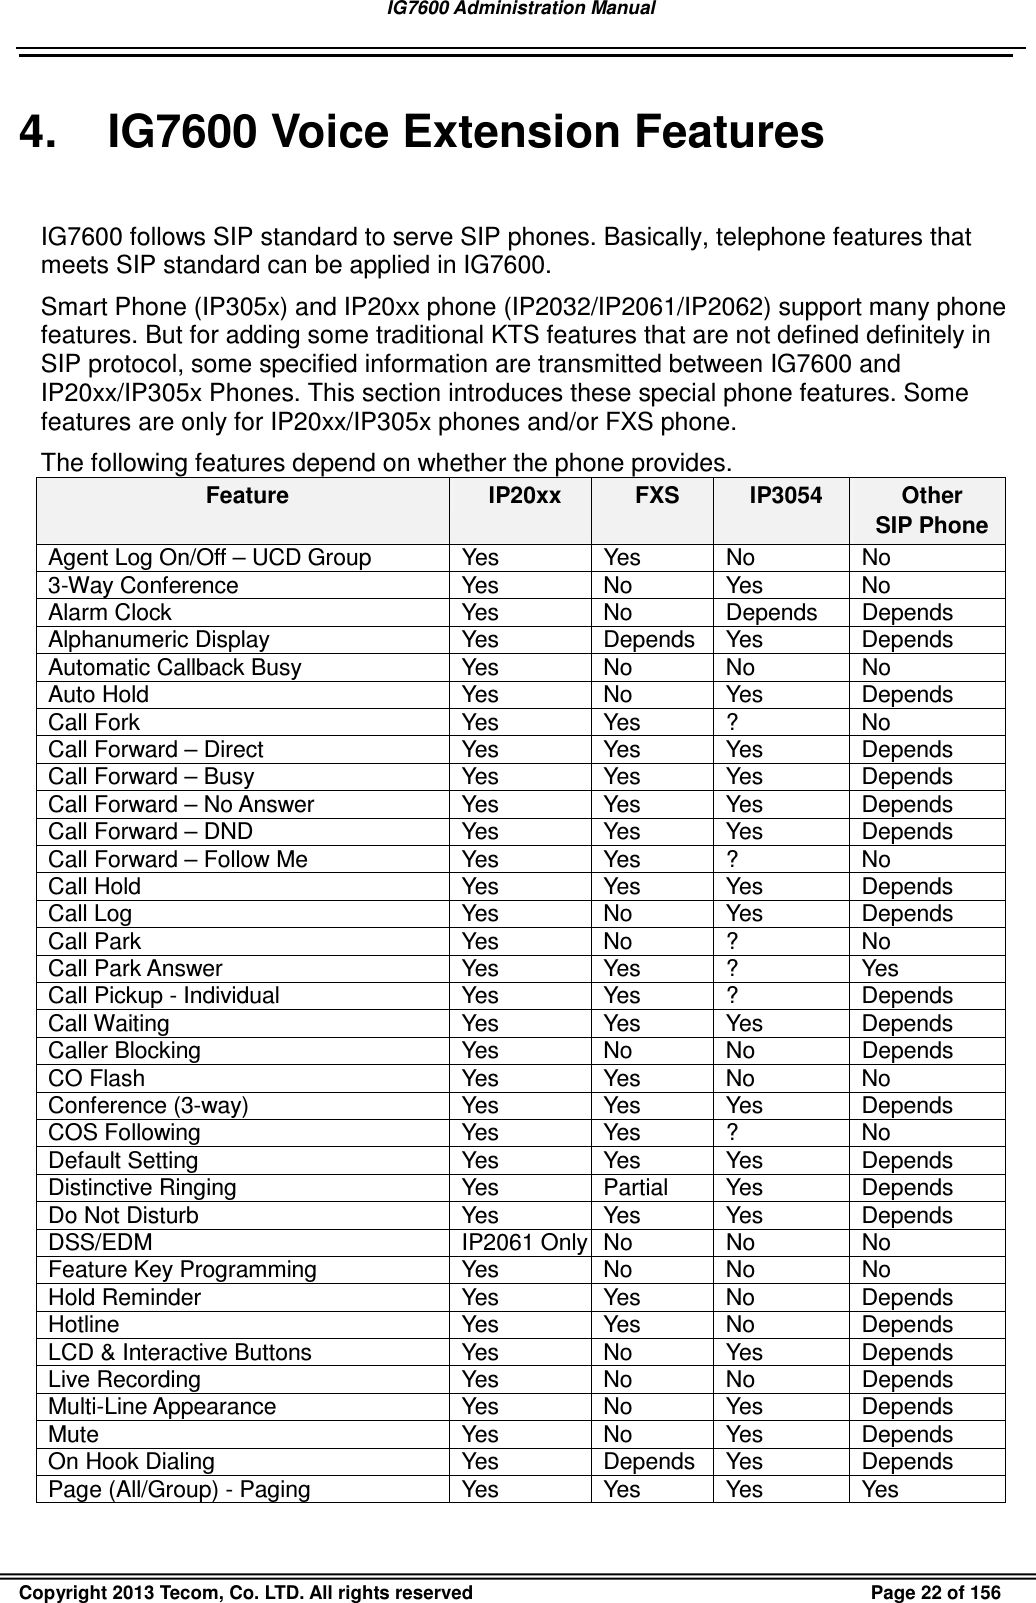 IG7600 Administration Manual                                                                                             Copyright 2013 Tecom, Co. LTD. All rights reserved  Page 22 of 156 4.  IG7600 Voice Extension Features IG7600 follows SIP standard to serve SIP phones. Basically, telephone features that meets SIP standard can be applied in IG7600. Smart Phone (IP305x) and IP20xx phone (IP2032/IP2061/IP2062) support many phone features. But for adding some traditional KTS features that are not defined definitely in SIP protocol, some specified information are transmitted between IG7600 and IP20xx/IP305x Phones. This section introduces these special phone features. Some features are only for IP20xx/IP305x phones and/or FXS phone. The following features depend on whether the phone provides. Feature  IP20xx  FXS  IP3054  Other SIP Phone Agent Log On/Off – UCD Group  Yes  Yes  No  No 3-Way Conference  Yes  No  Yes  No Alarm Clock  Yes  No  Depends  Depends Alphanumeric Display  Yes  Depends Yes  Depends Automatic Callback Busy  Yes  No  No  No Auto Hold  Yes  No  Yes  Depends Call Fork  Yes  Yes  ?  No Call Forward – Direct  Yes  Yes  Yes  Depends Call Forward – Busy  Yes  Yes  Yes  Depends Call Forward – No Answer  Yes  Yes  Yes  Depends Call Forward – DND  Yes  Yes  Yes  Depends Call Forward – Follow Me  Yes  Yes  ?  No Call Hold  Yes  Yes  Yes  Depends Call Log  Yes  No  Yes  Depends Call Park  Yes  No  ?  No Call Park Answer  Yes  Yes  ?  Yes Call Pickup - Individual  Yes  Yes  ?  Depends Call Waiting  Yes  Yes  Yes  Depends Caller Blocking  Yes  No  No  Depends CO Flash  Yes  Yes  No  No Conference (3-way)  Yes  Yes  Yes  Depends COS Following  Yes  Yes  ?  No Default Setting  Yes  Yes  Yes  Depends Distinctive Ringing  Yes  Partial  Yes  Depends Do Not Disturb  Yes  Yes  Yes  Depends DSS/EDM  IP2061 Only No  No  No Feature Key Programming  Yes  No  No  No Hold Reminder  Yes  Yes  No  Depends Hotline  Yes  Yes  No  Depends LCD &amp; Interactive Buttons  Yes  No  Yes  Depends Live Recording  Yes  No  No  Depends Multi-Line Appearance  Yes  No  Yes  Depends Mute  Yes  No  Yes  Depends On Hook Dialing  Yes  Depends Yes  Depends Page (All/Group) - Paging  Yes  Yes  Yes  Yes 